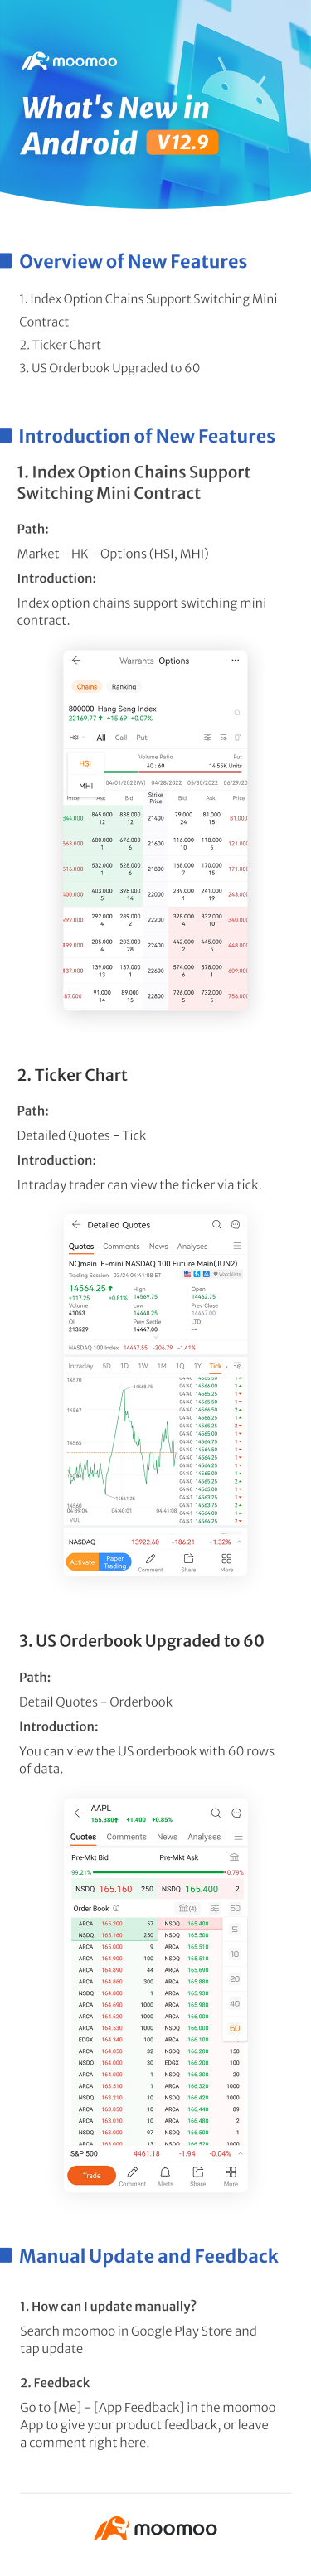 What's New: Ticker Chart Available in Android v12.9